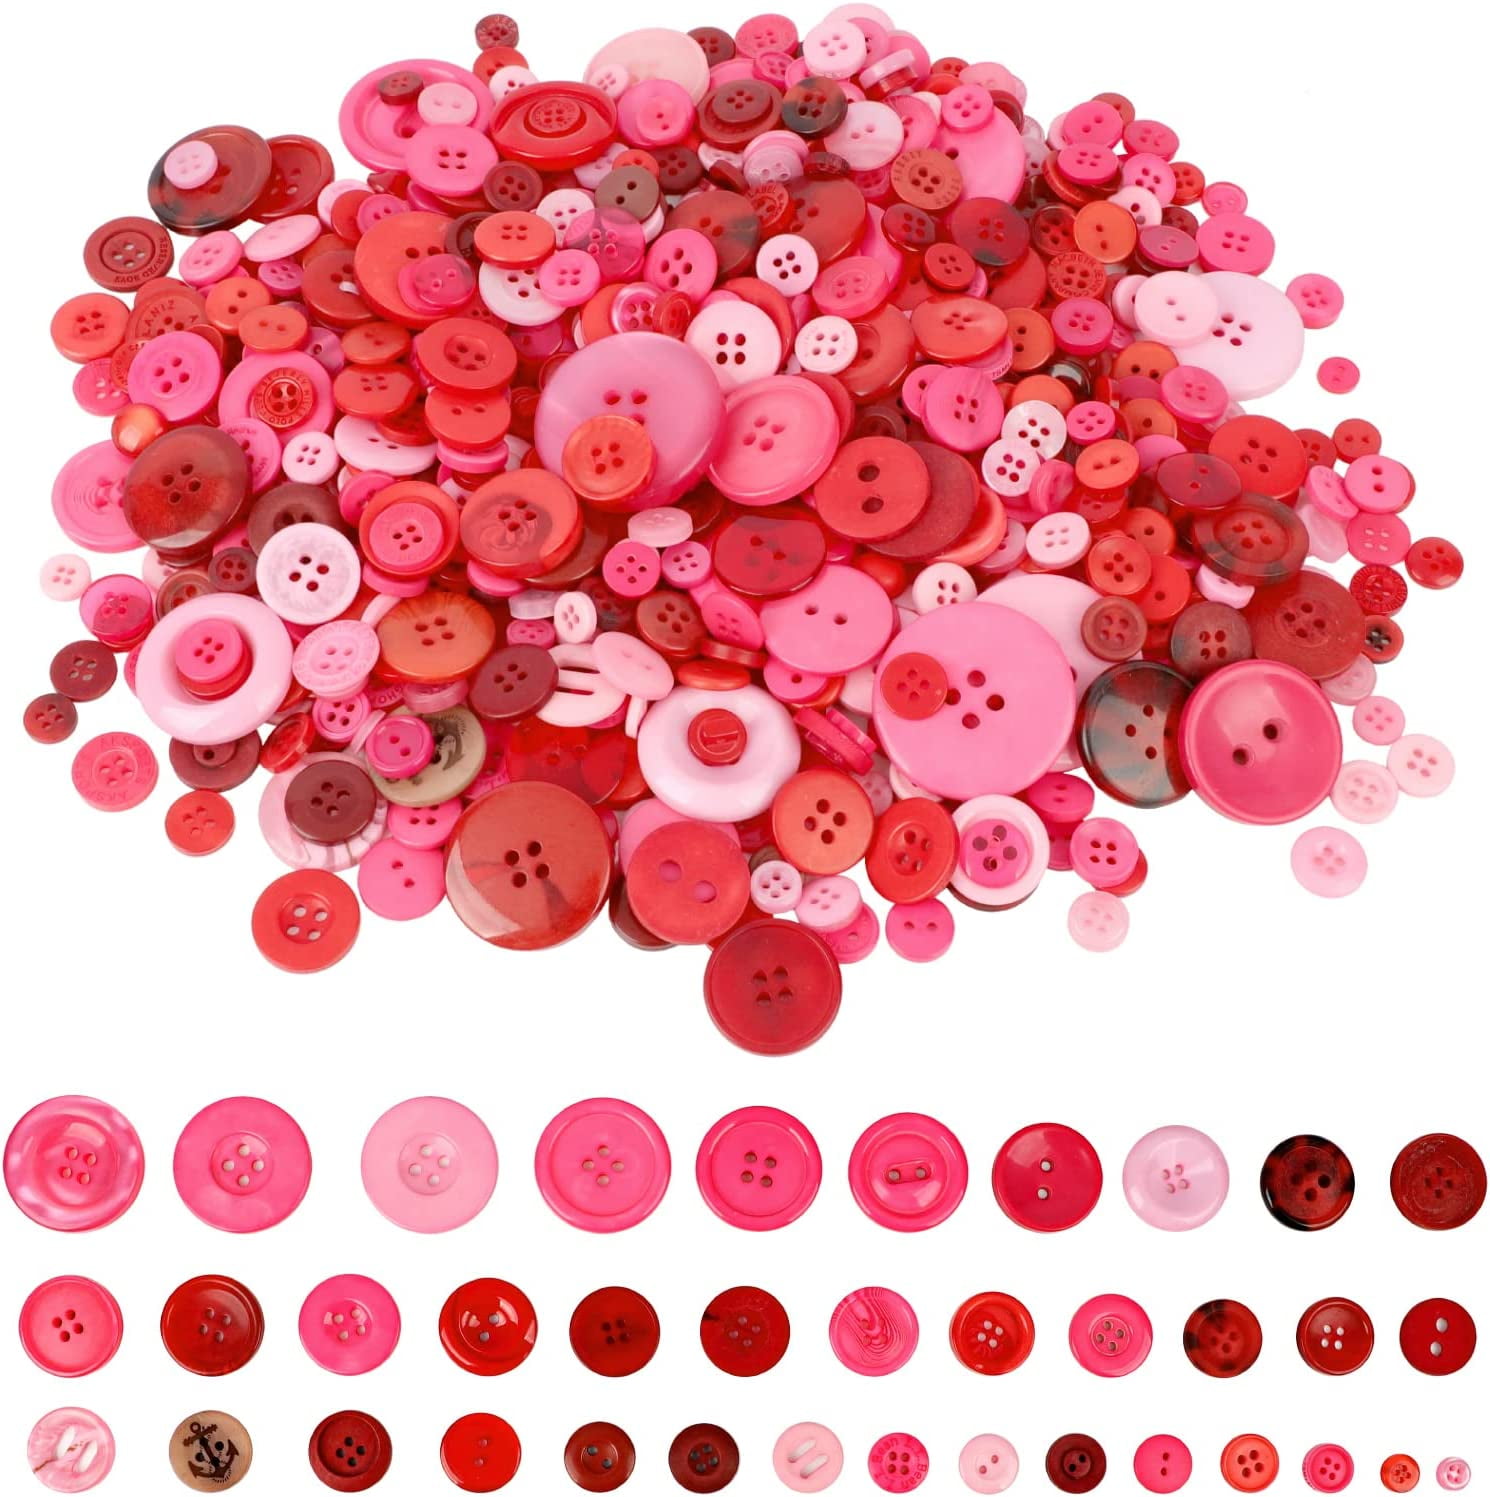  Esoca 650Pcs Red Craft Buttons Pink Red Buttons For Crafts  Assorted Resin Buttons Lot Of Red Buttons For Crafting